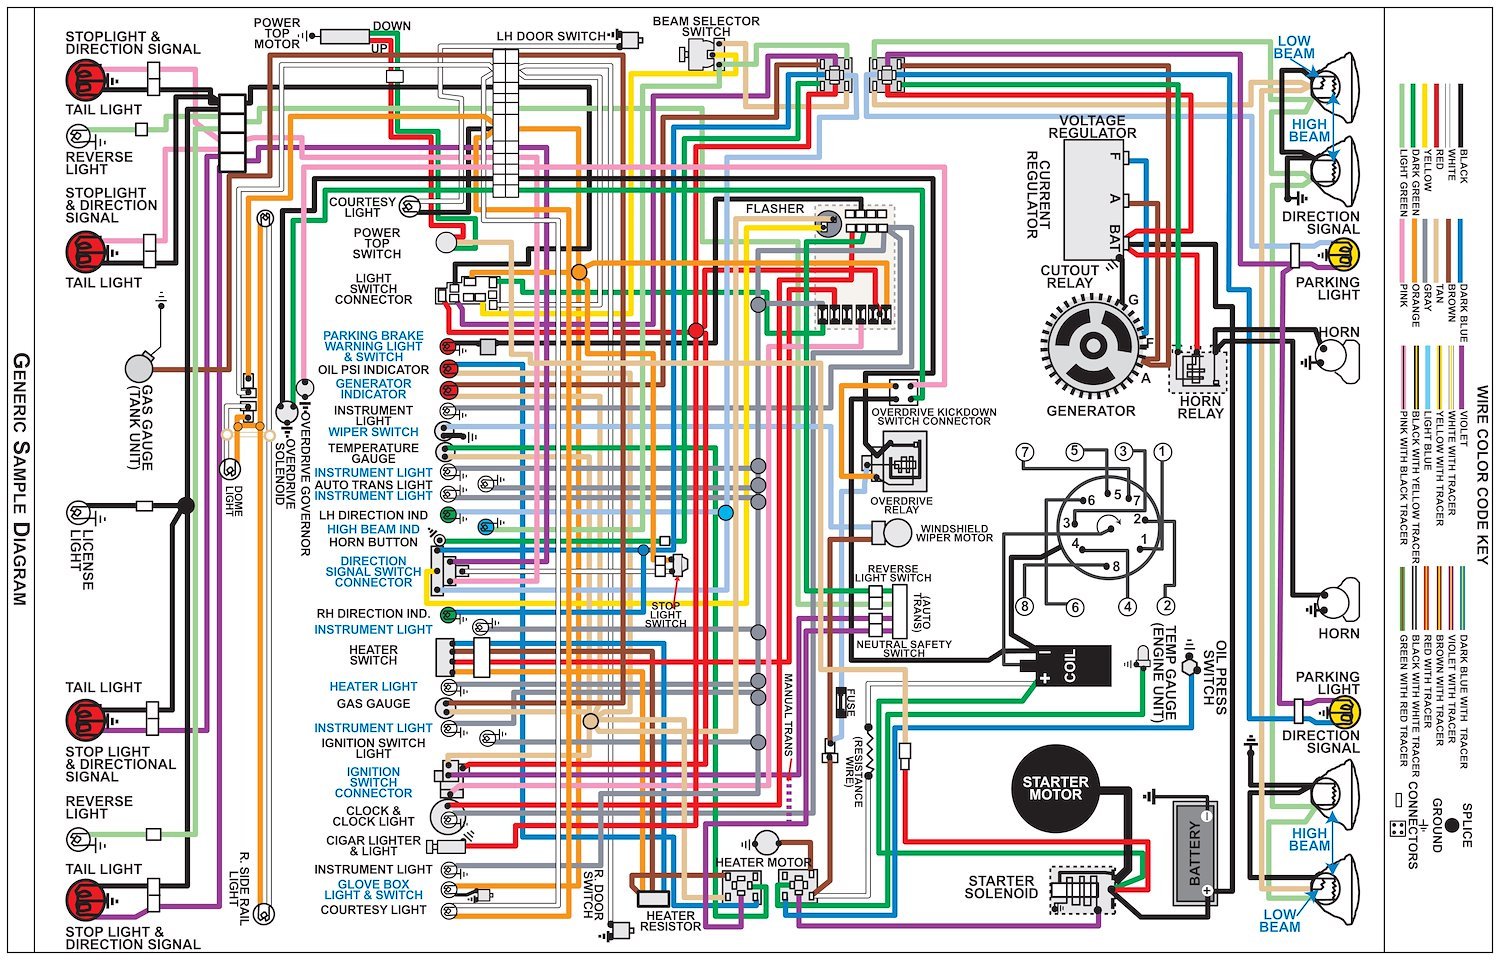 Wiring Diagram for 1966 Plymouth Barracuda, 11 in x 17 in., Laminated